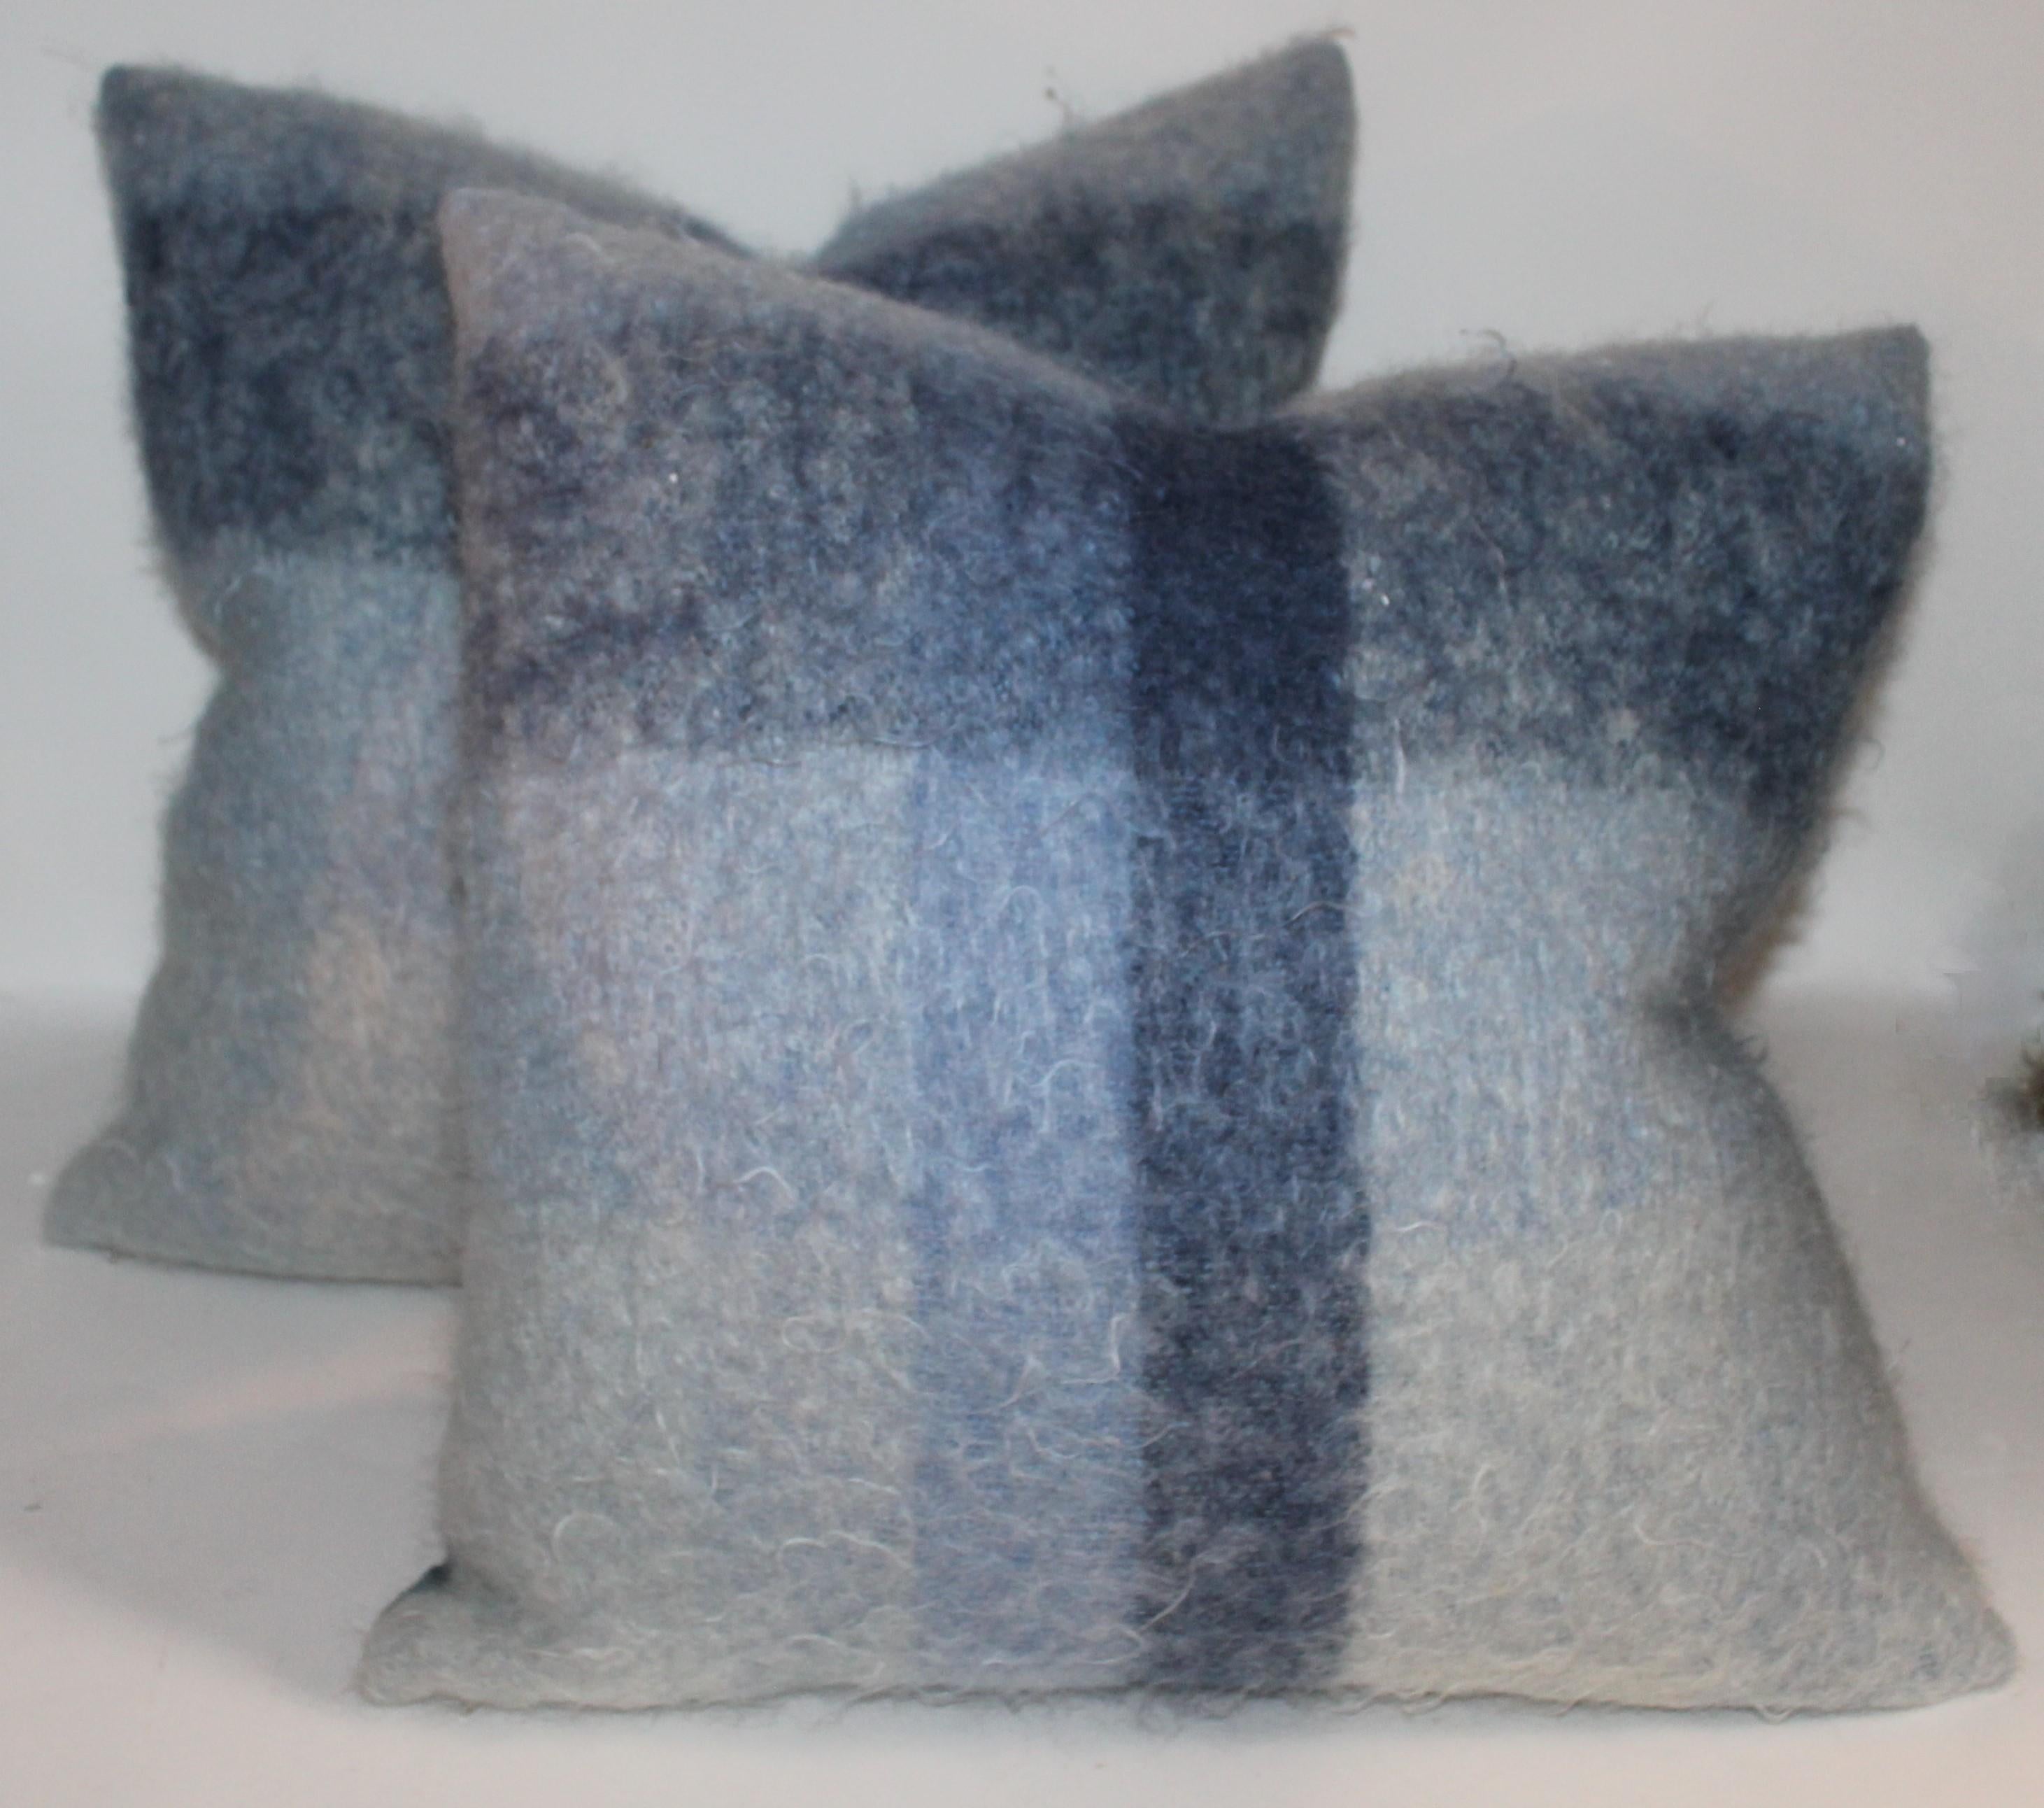 Mid-Century Modern Mohair Pillows in Blues from Vintage Blanket, Pair